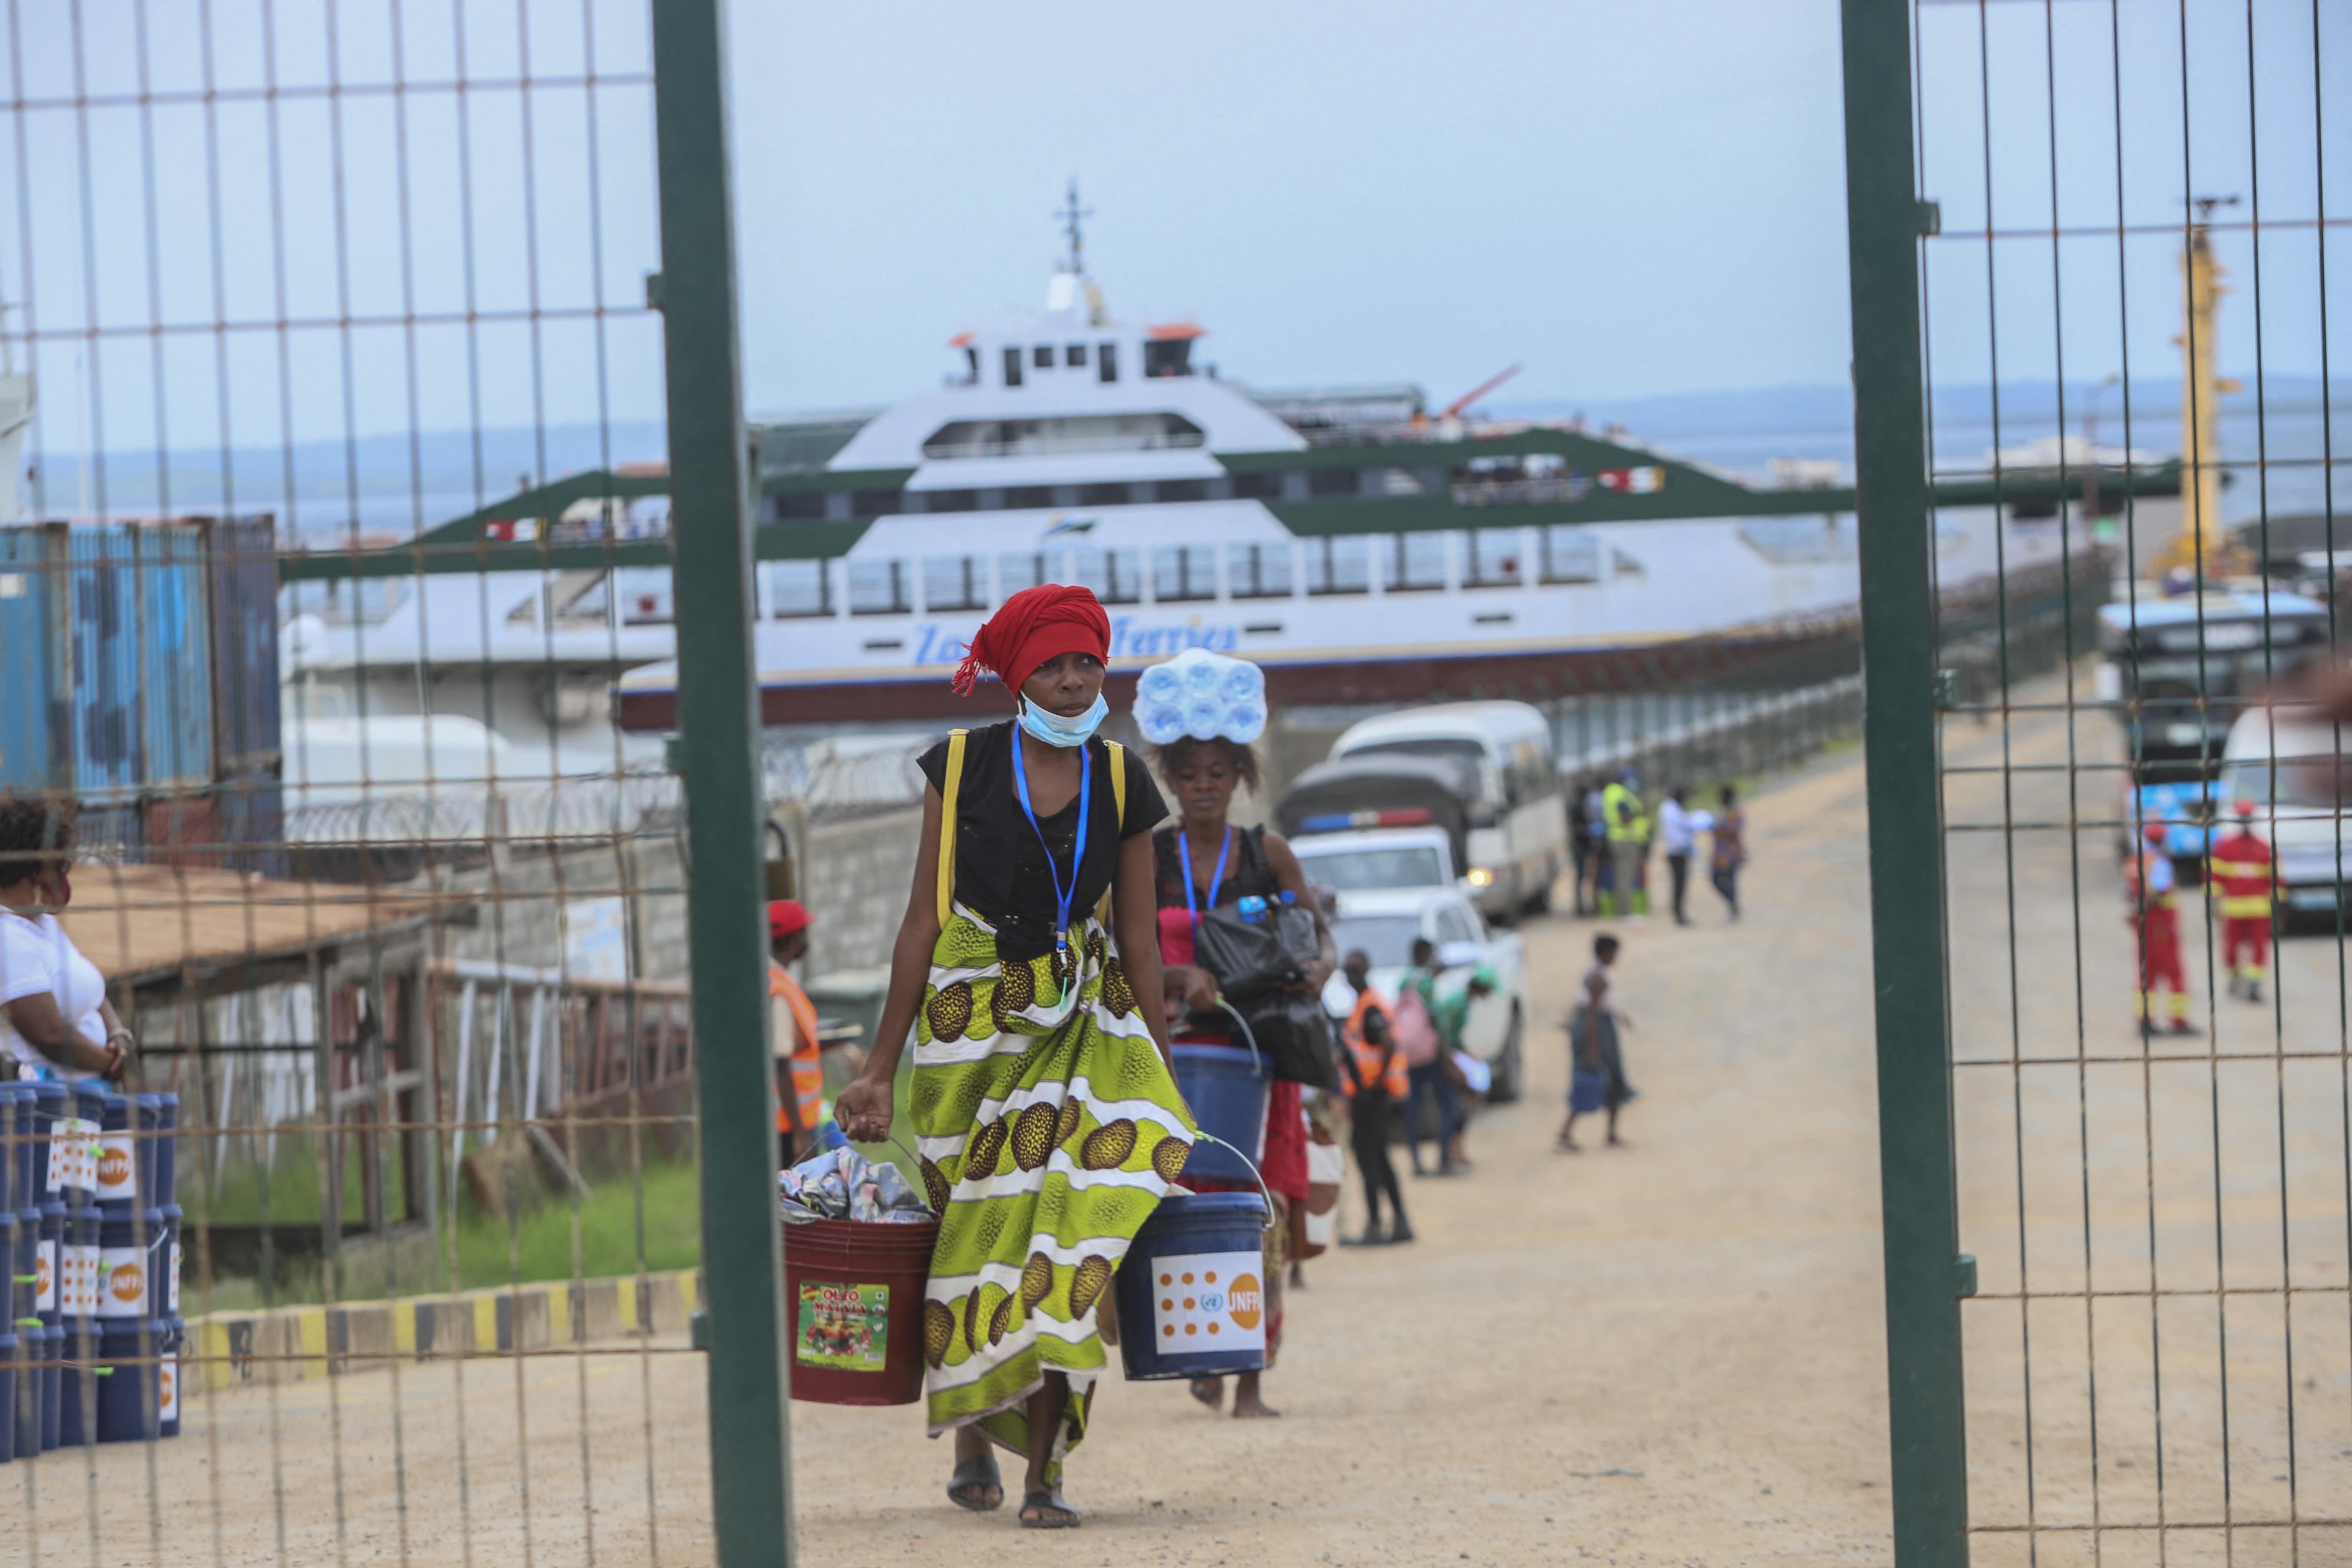 With a large ship on the water in the background, people carrying possessions walk up a dirt path toward an open gate in a fence.  